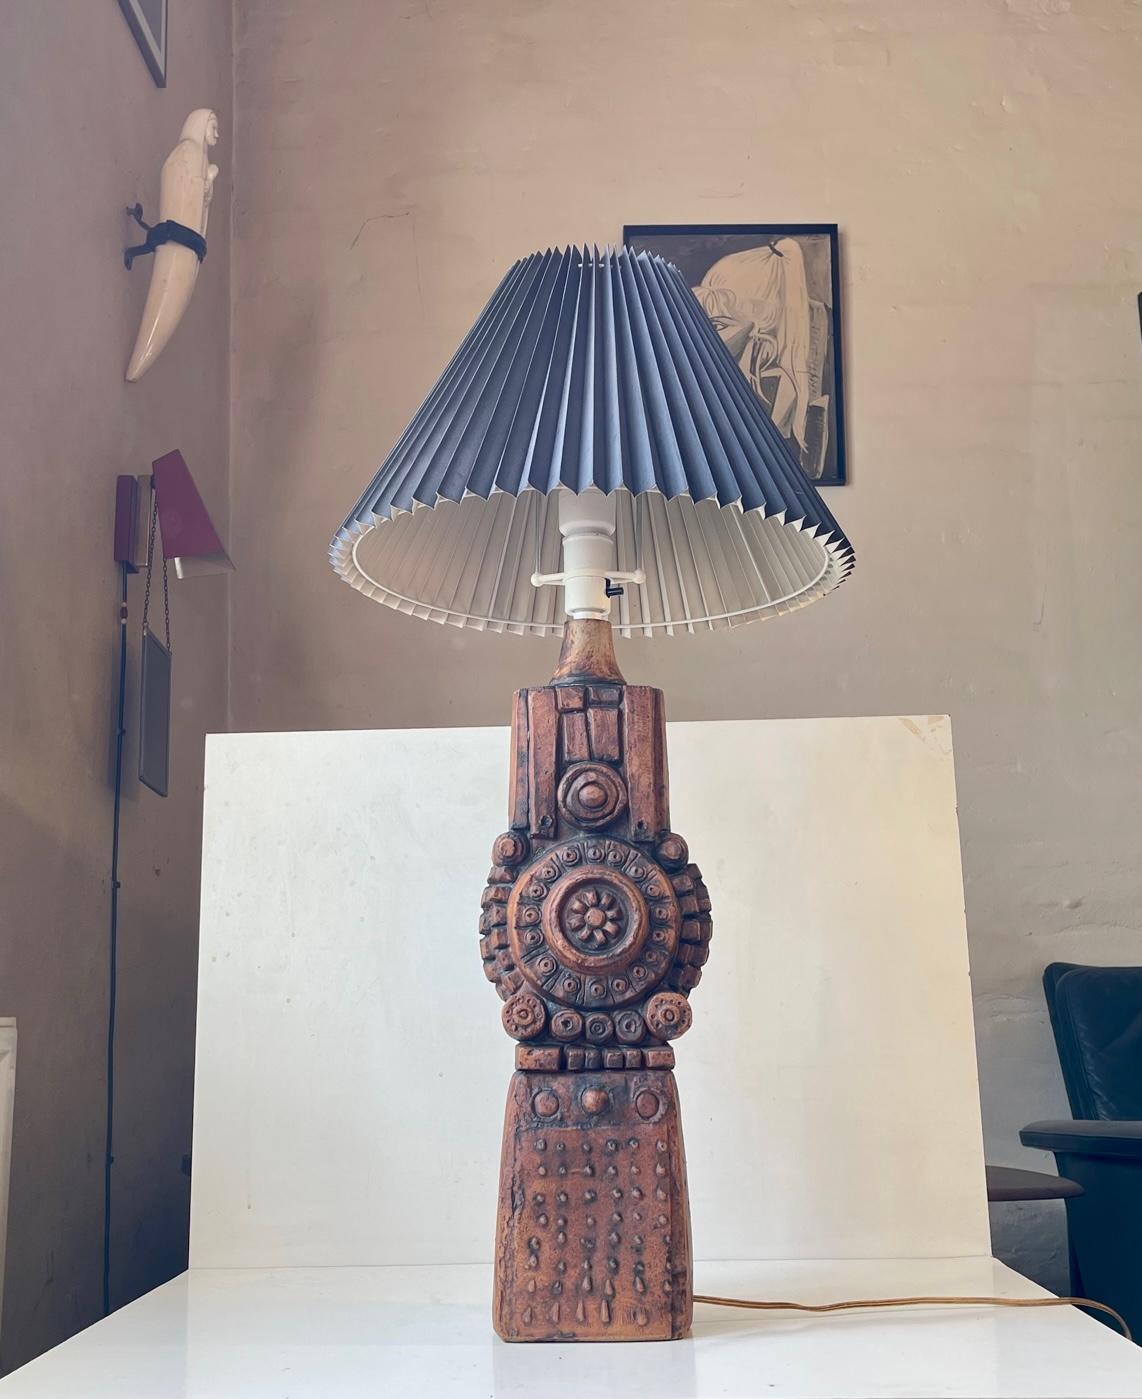 Stoneware 'Totem Lamp' - large table lamp or small floor lamp. Its a sculptural piece, made from handcrafted ceramic elements in natural tones of terracotta and stoneware. Stylistically it borders brutalism and abstract modernism in appearance. It